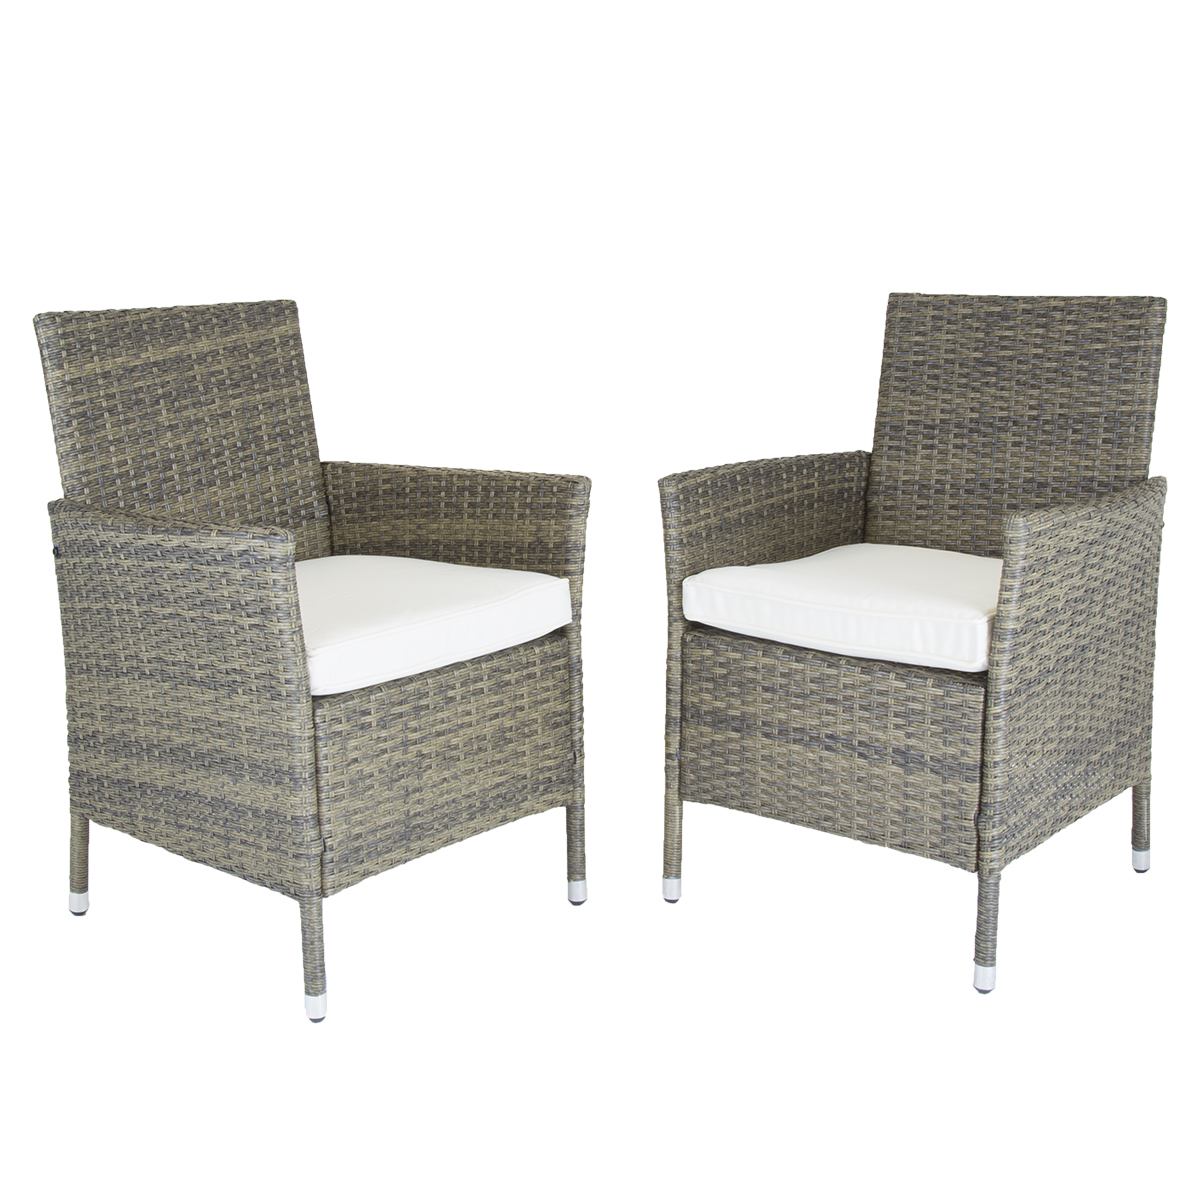 Charles Bentley Pair Of Rattan Dining Chairs Natural